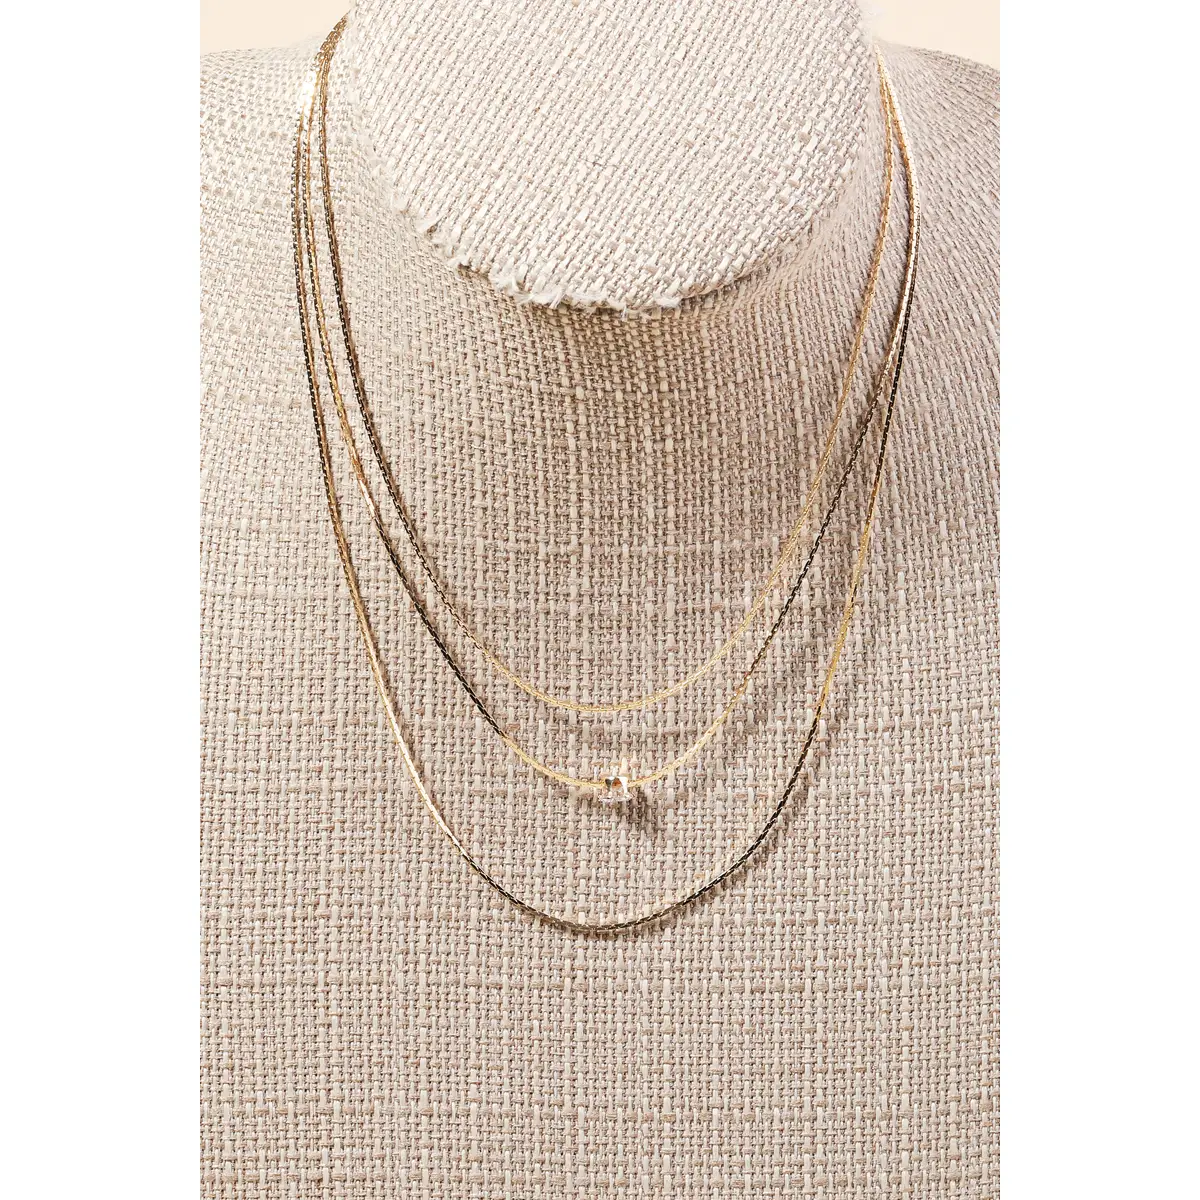 Triple Layered Chain Necklace - SILVER